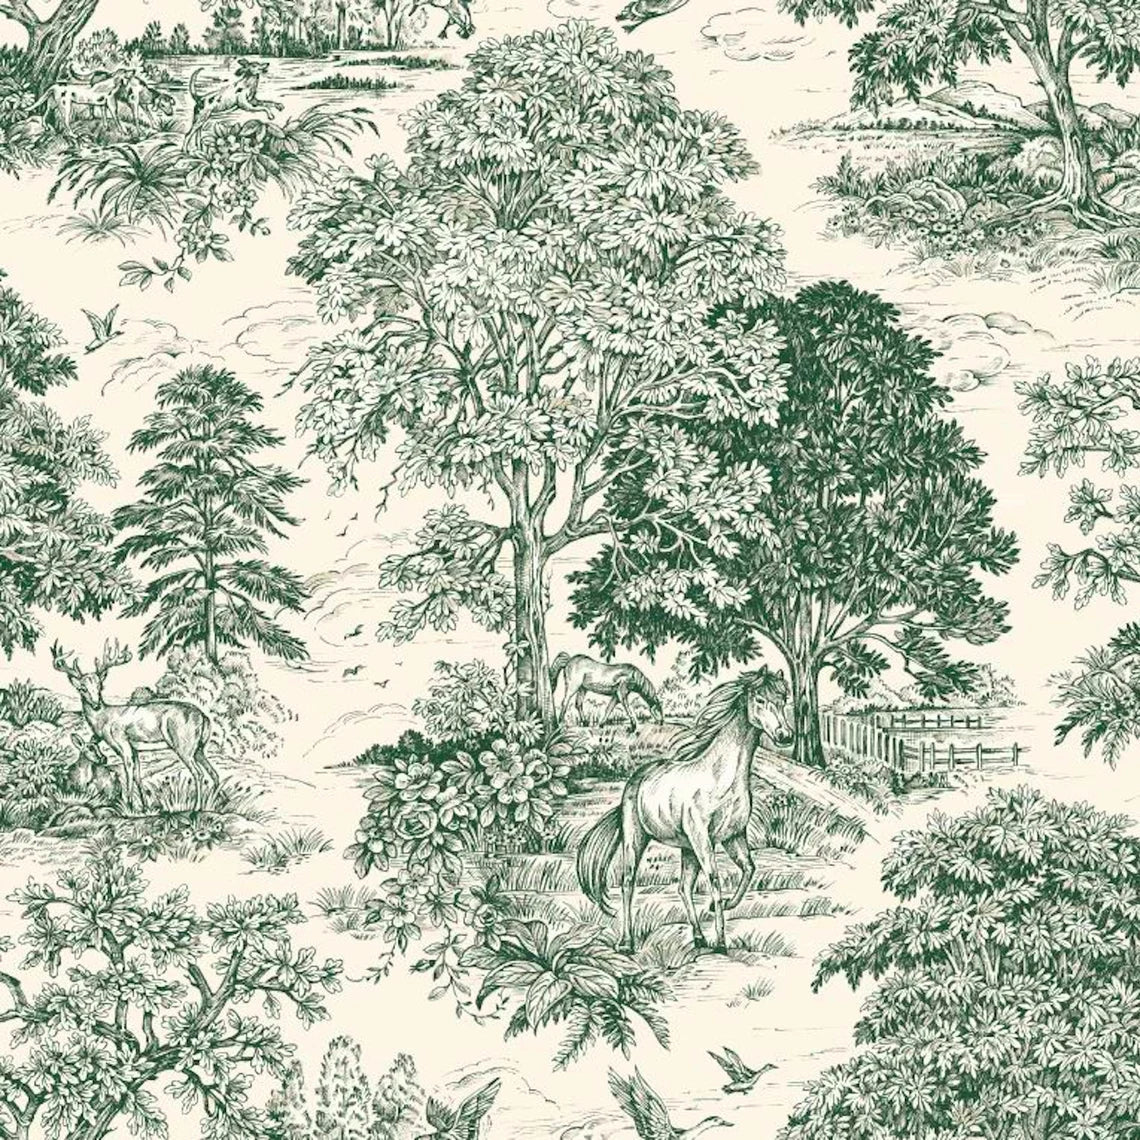 pinch pleated curtain panels pair in Yellowstone Classic Green Country Toile- Horses, Deer, Dogs- Large Scale